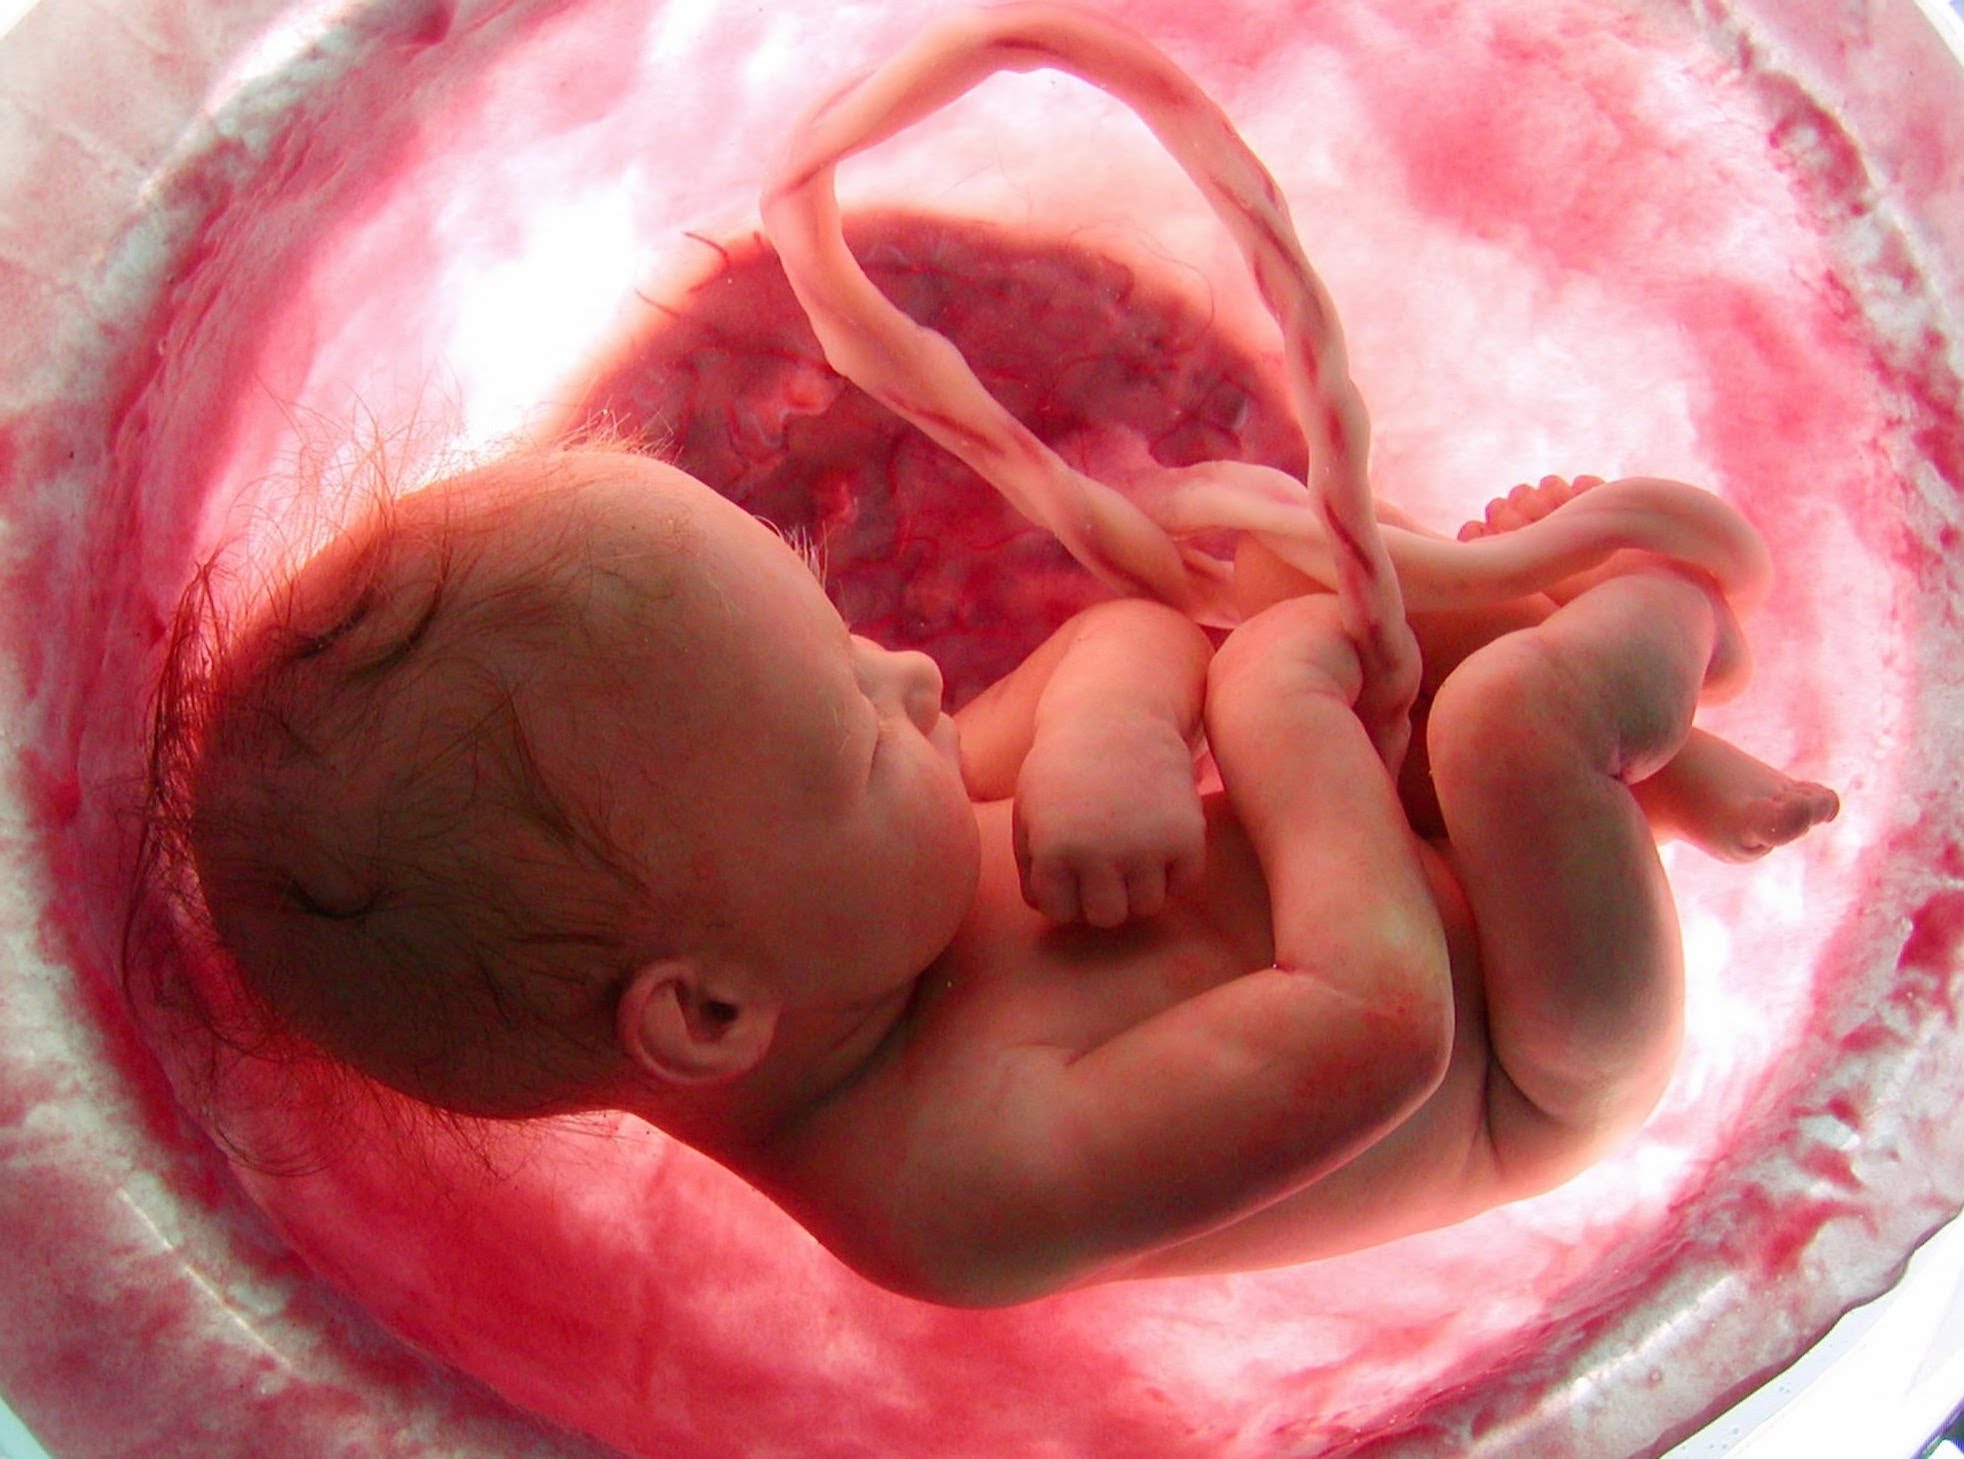 When Is A Baby In The Womb Fully Developed?